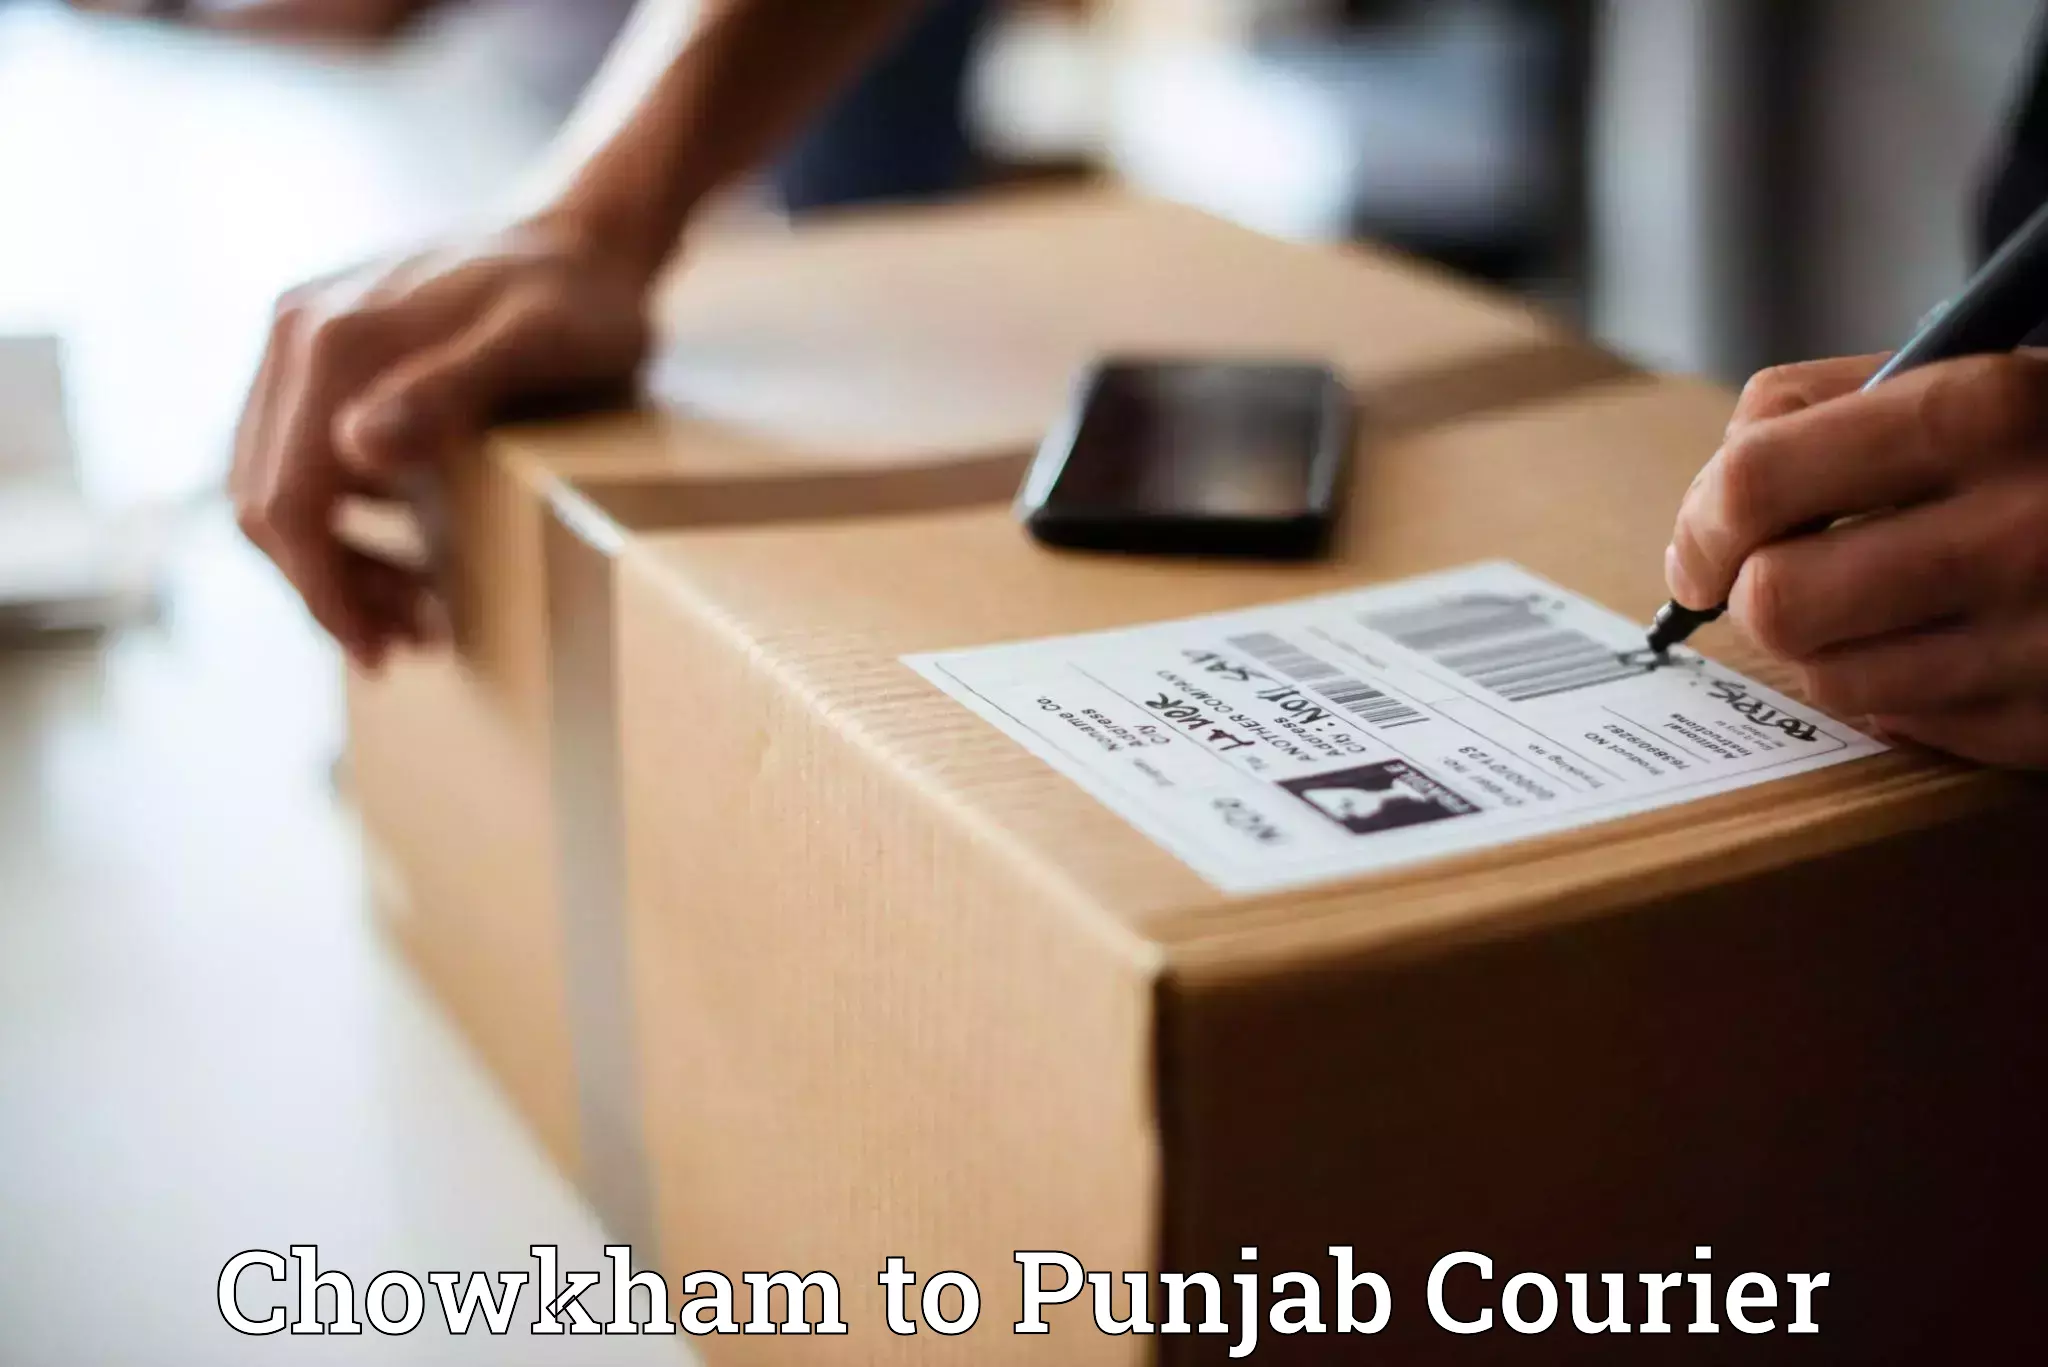 Sustainable delivery practices Chowkham to Punjab